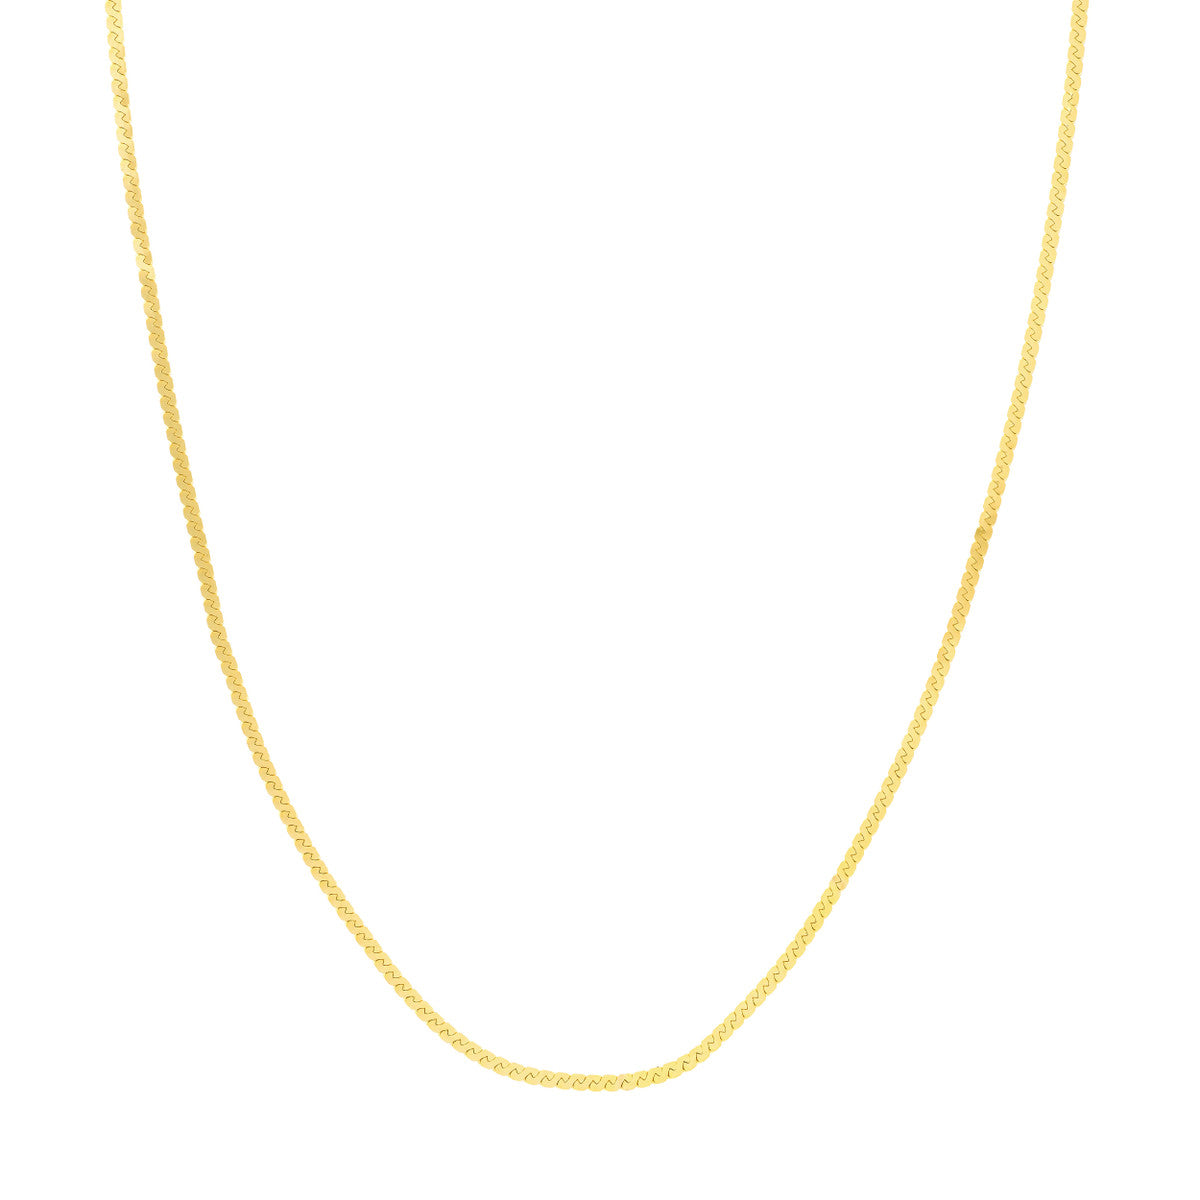 14K Gold 2mm Serpentine Chain Necklace with Lobster Lock